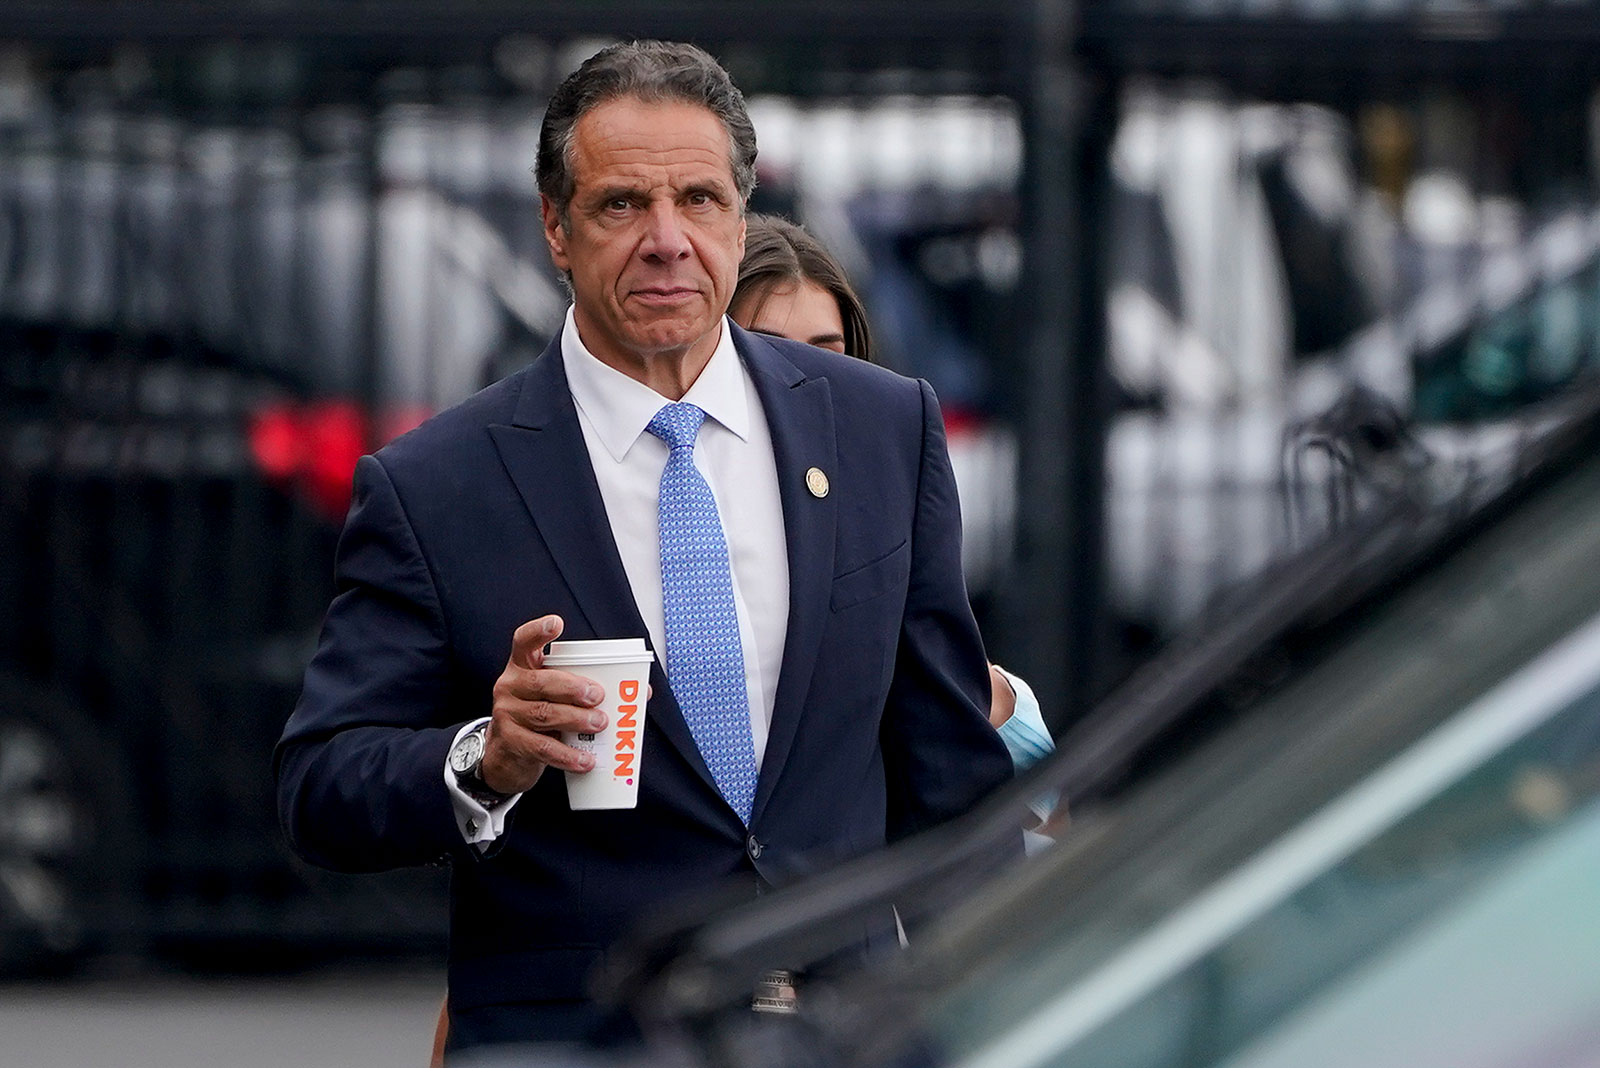 New York Gov. Andrew Cuomo prepares to board a helicopter after announcing his resignation on Tuesday.